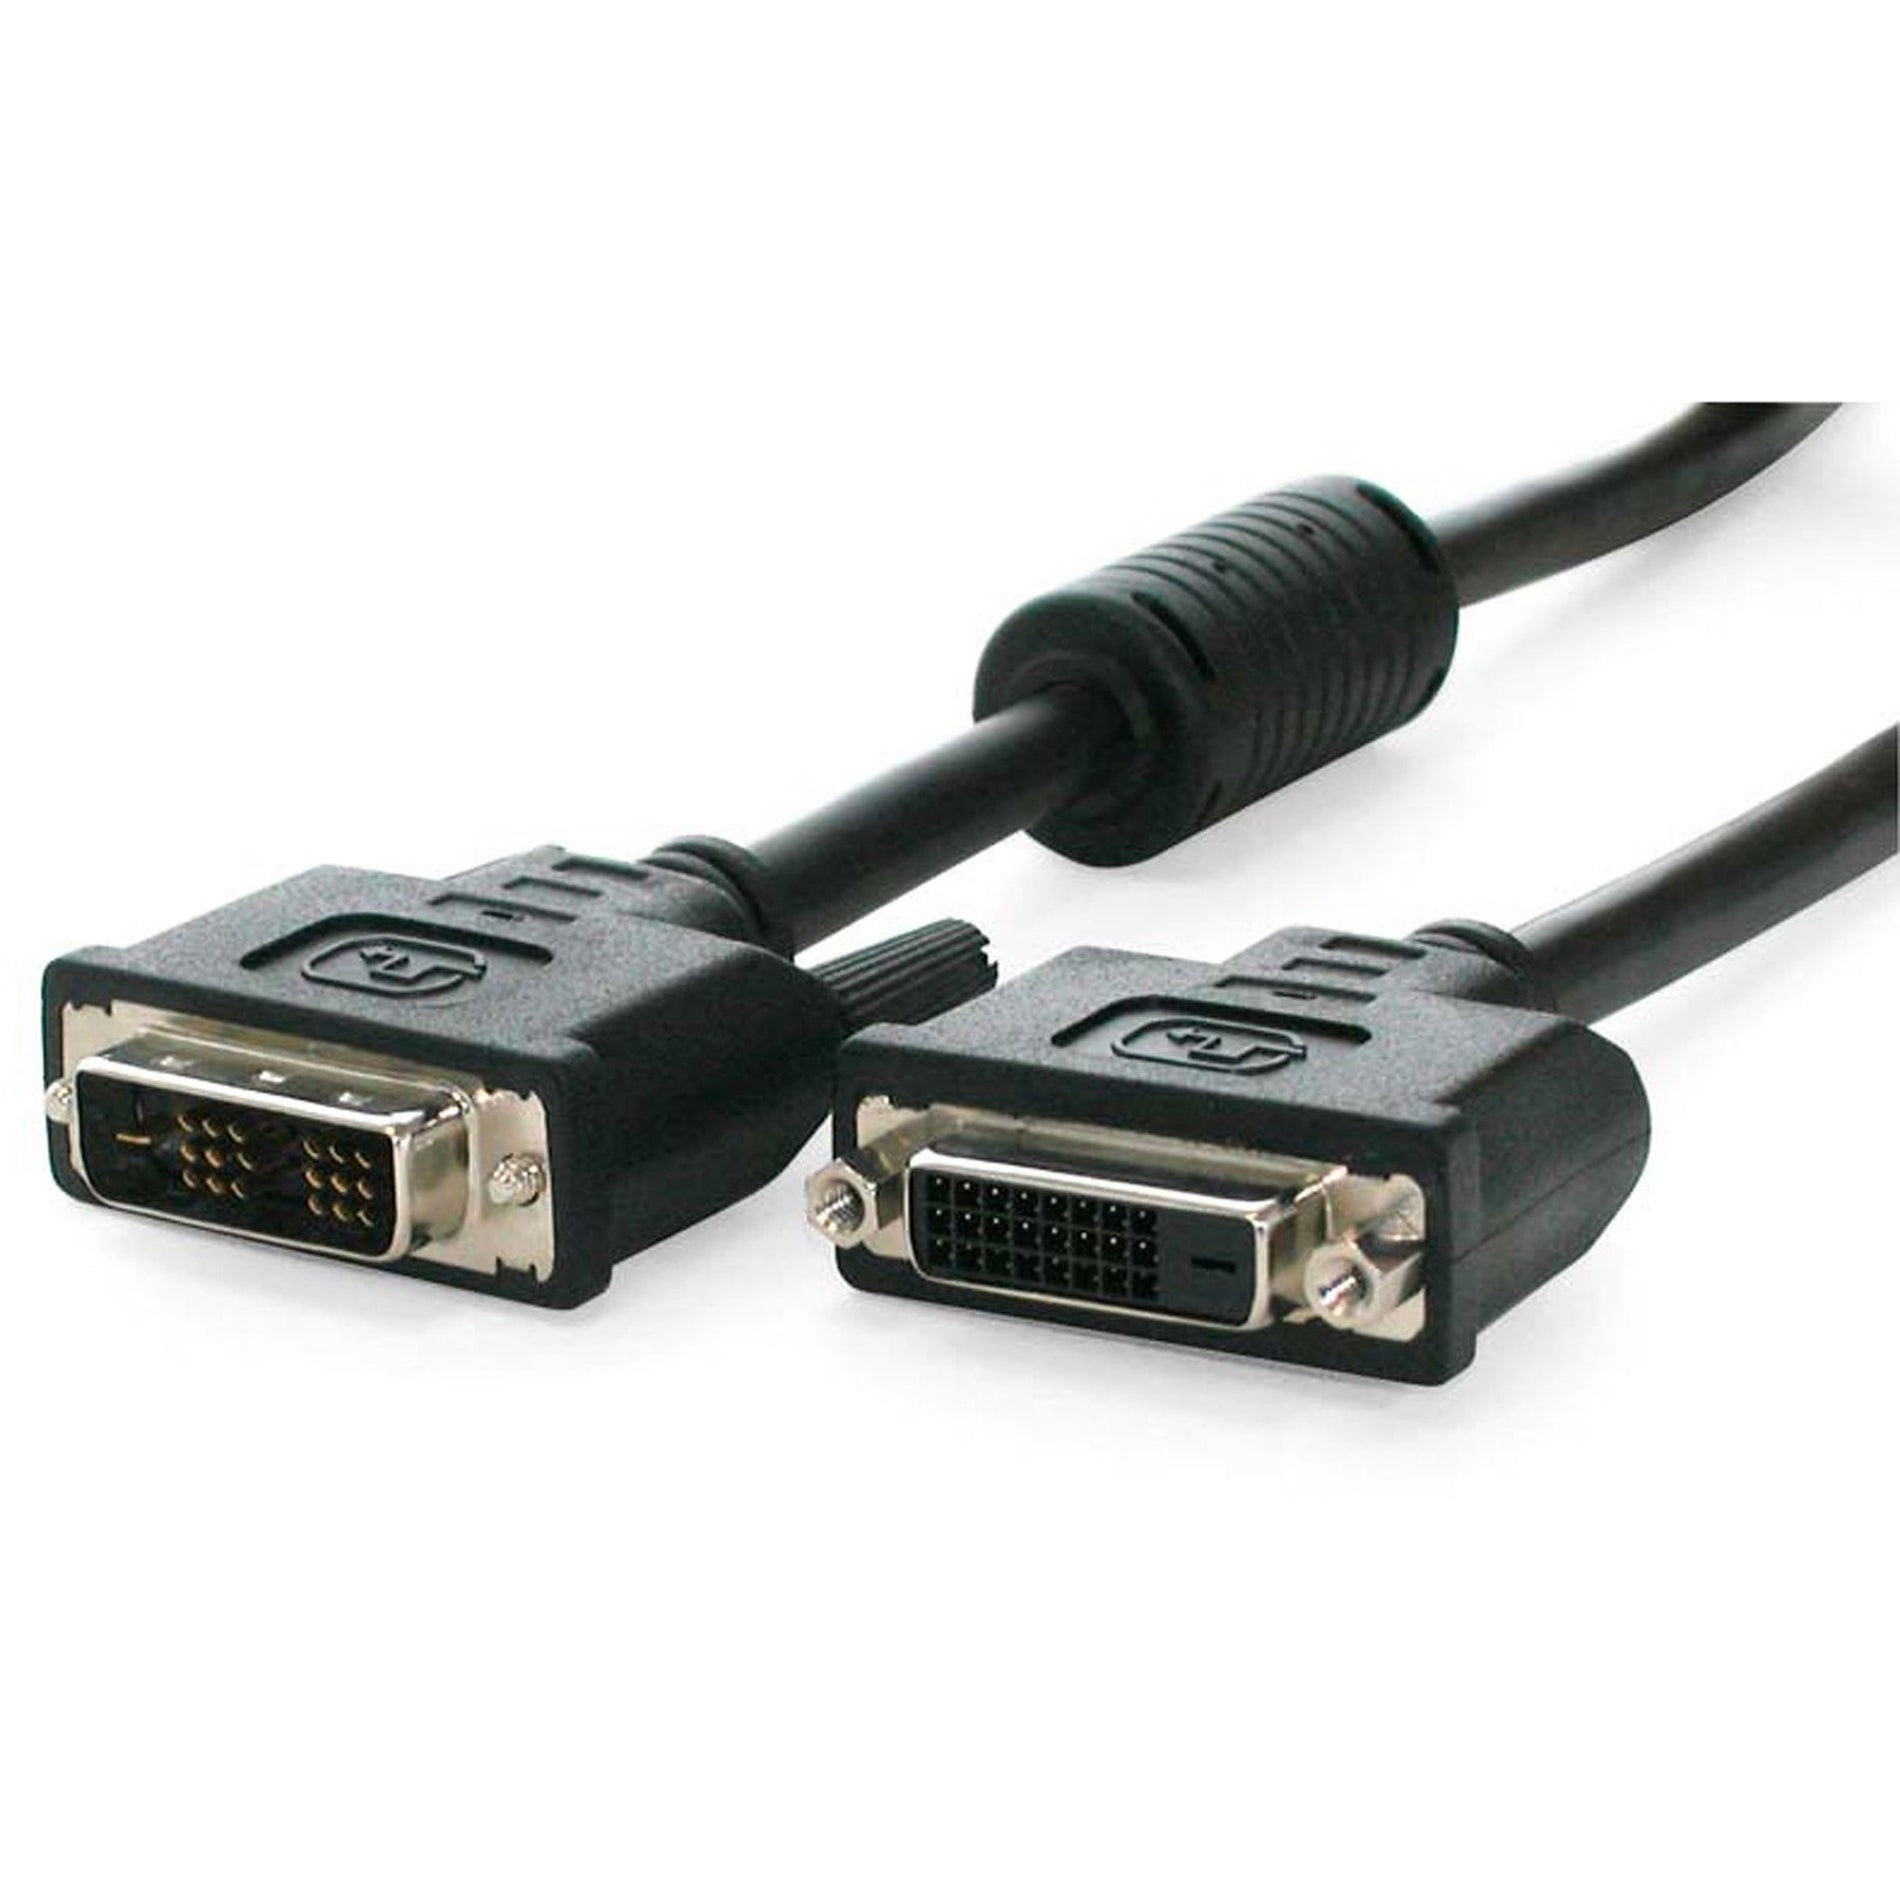 StarTech.com DVIDSMF6 6ft DVI-D Monitor Extension Cable, Supports Hot Plugging, Molded Strain Relief